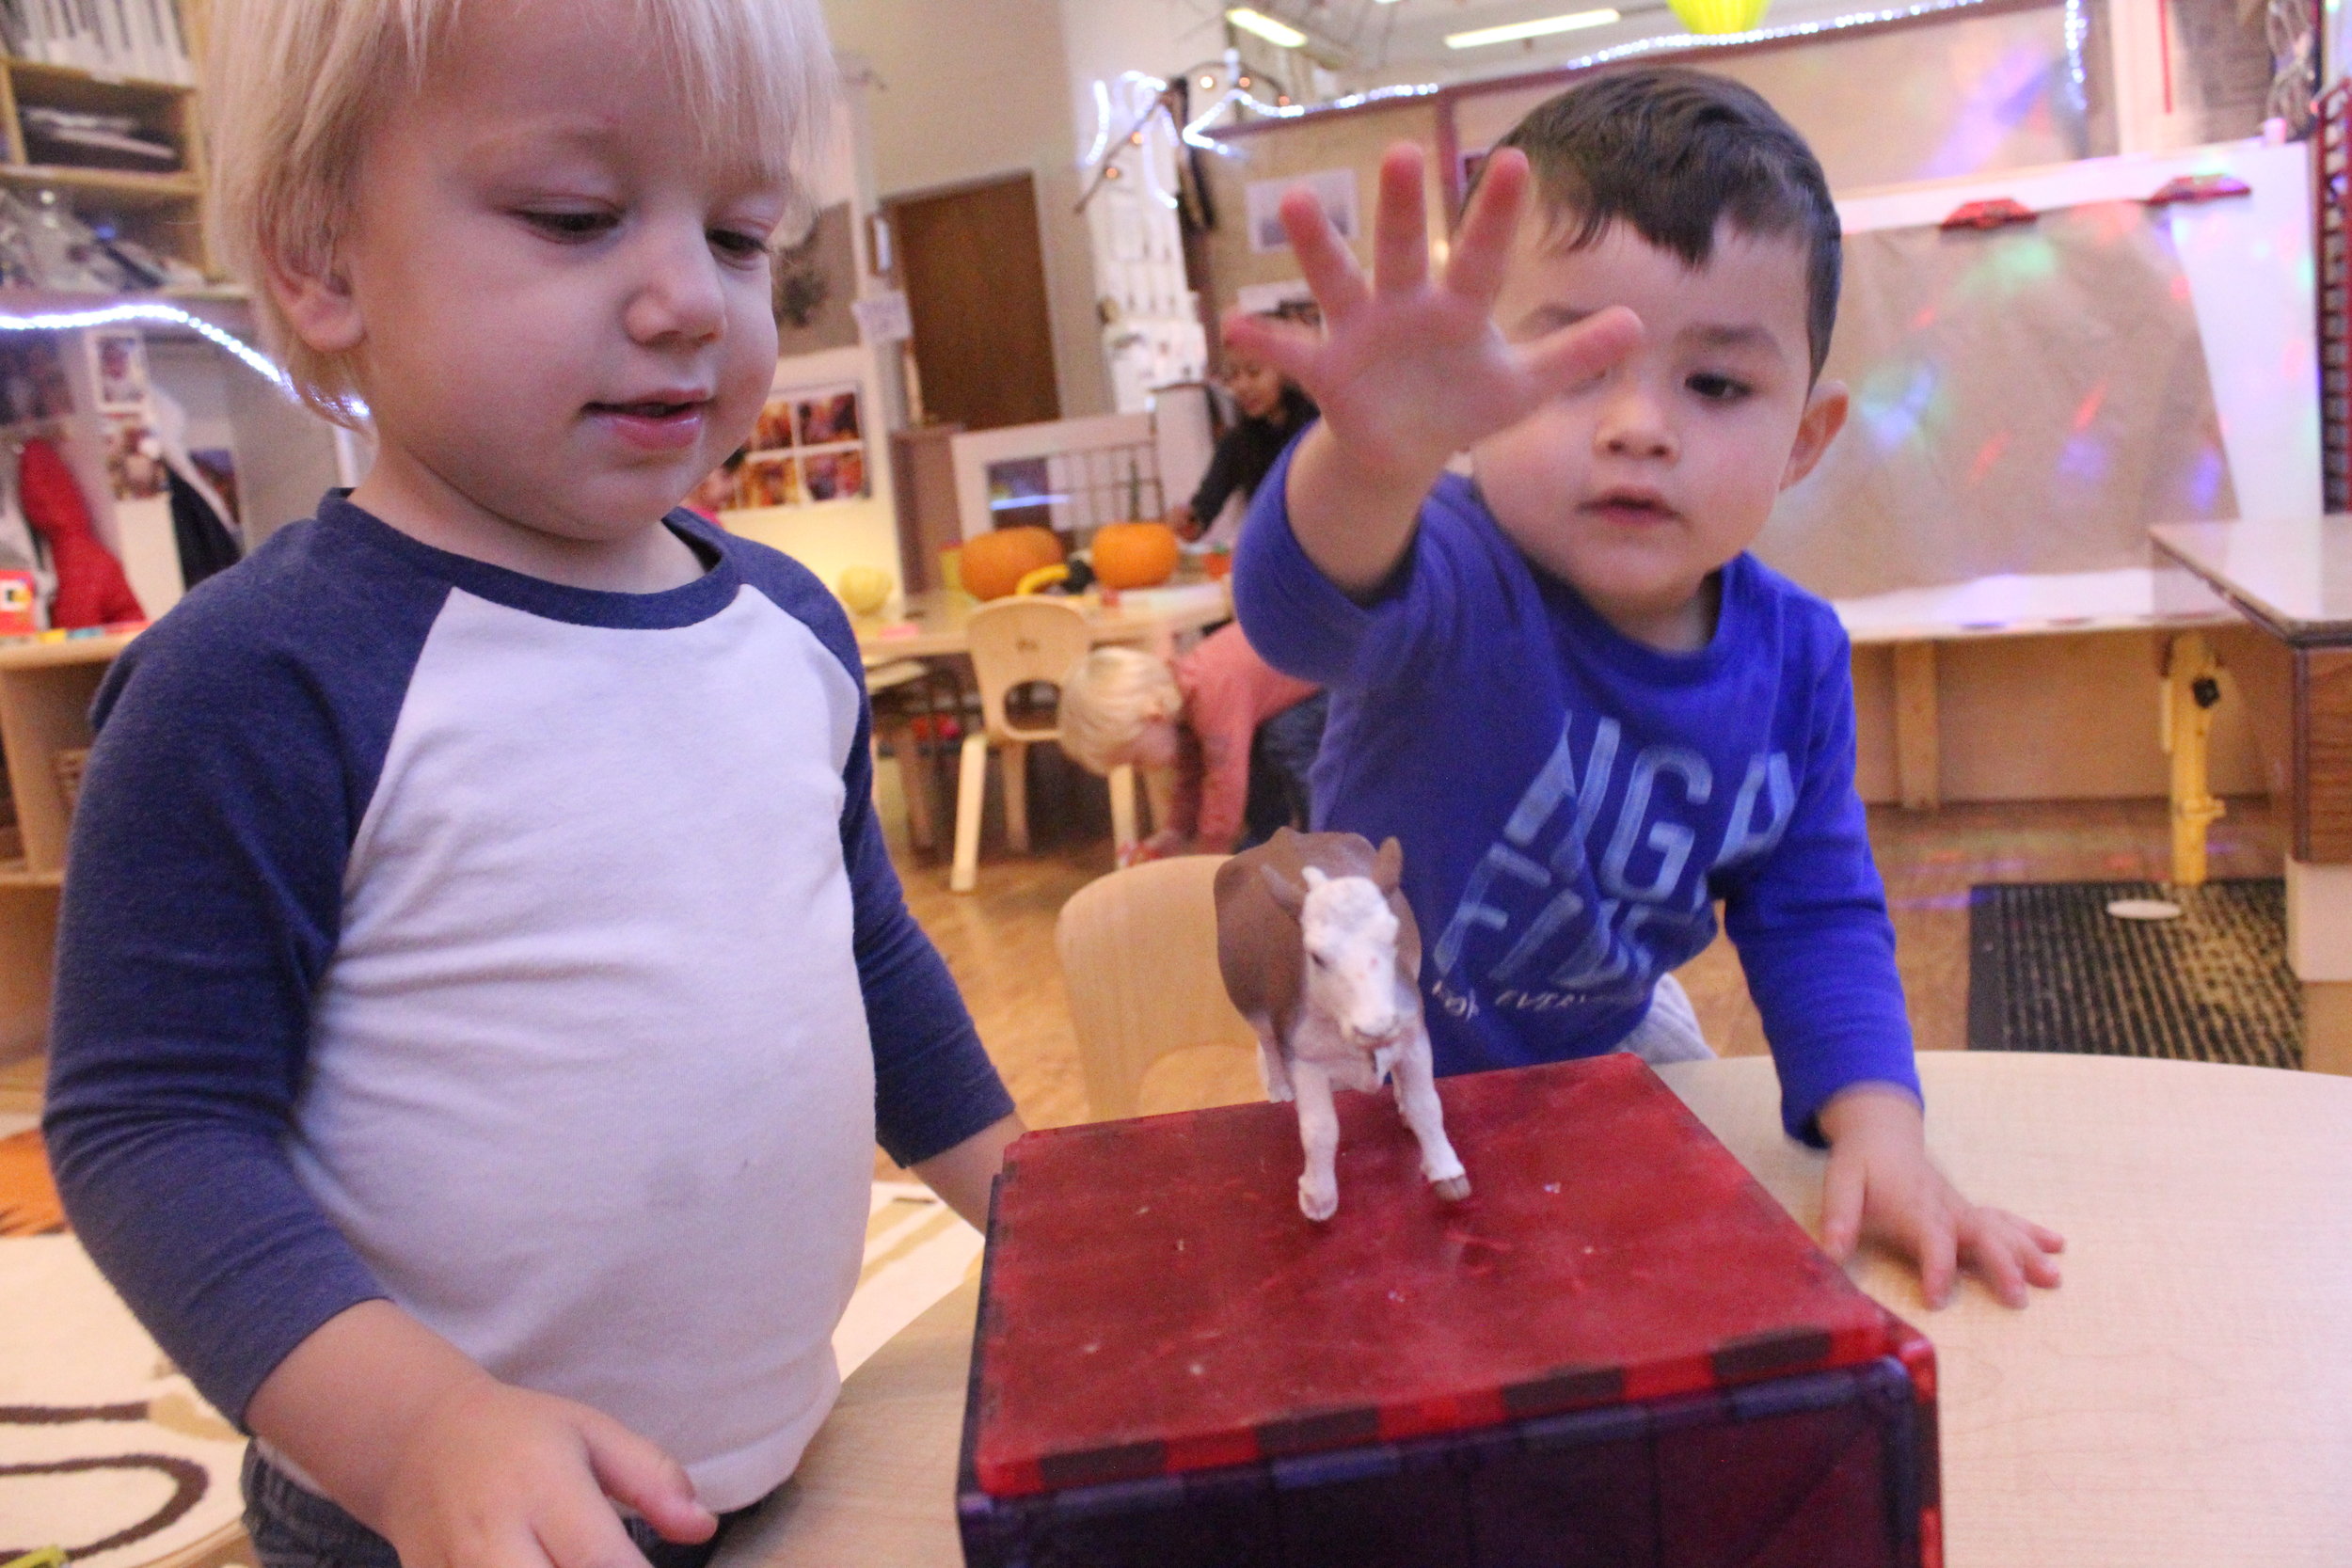  Every morning upon entering the 2A classroom, Nicholas requests to build "A house!". Nicholas always spends a great deal of time on his magna-tile "houses" and loves to put animals inside of them. Emilio, of course always loves to jump into whatever